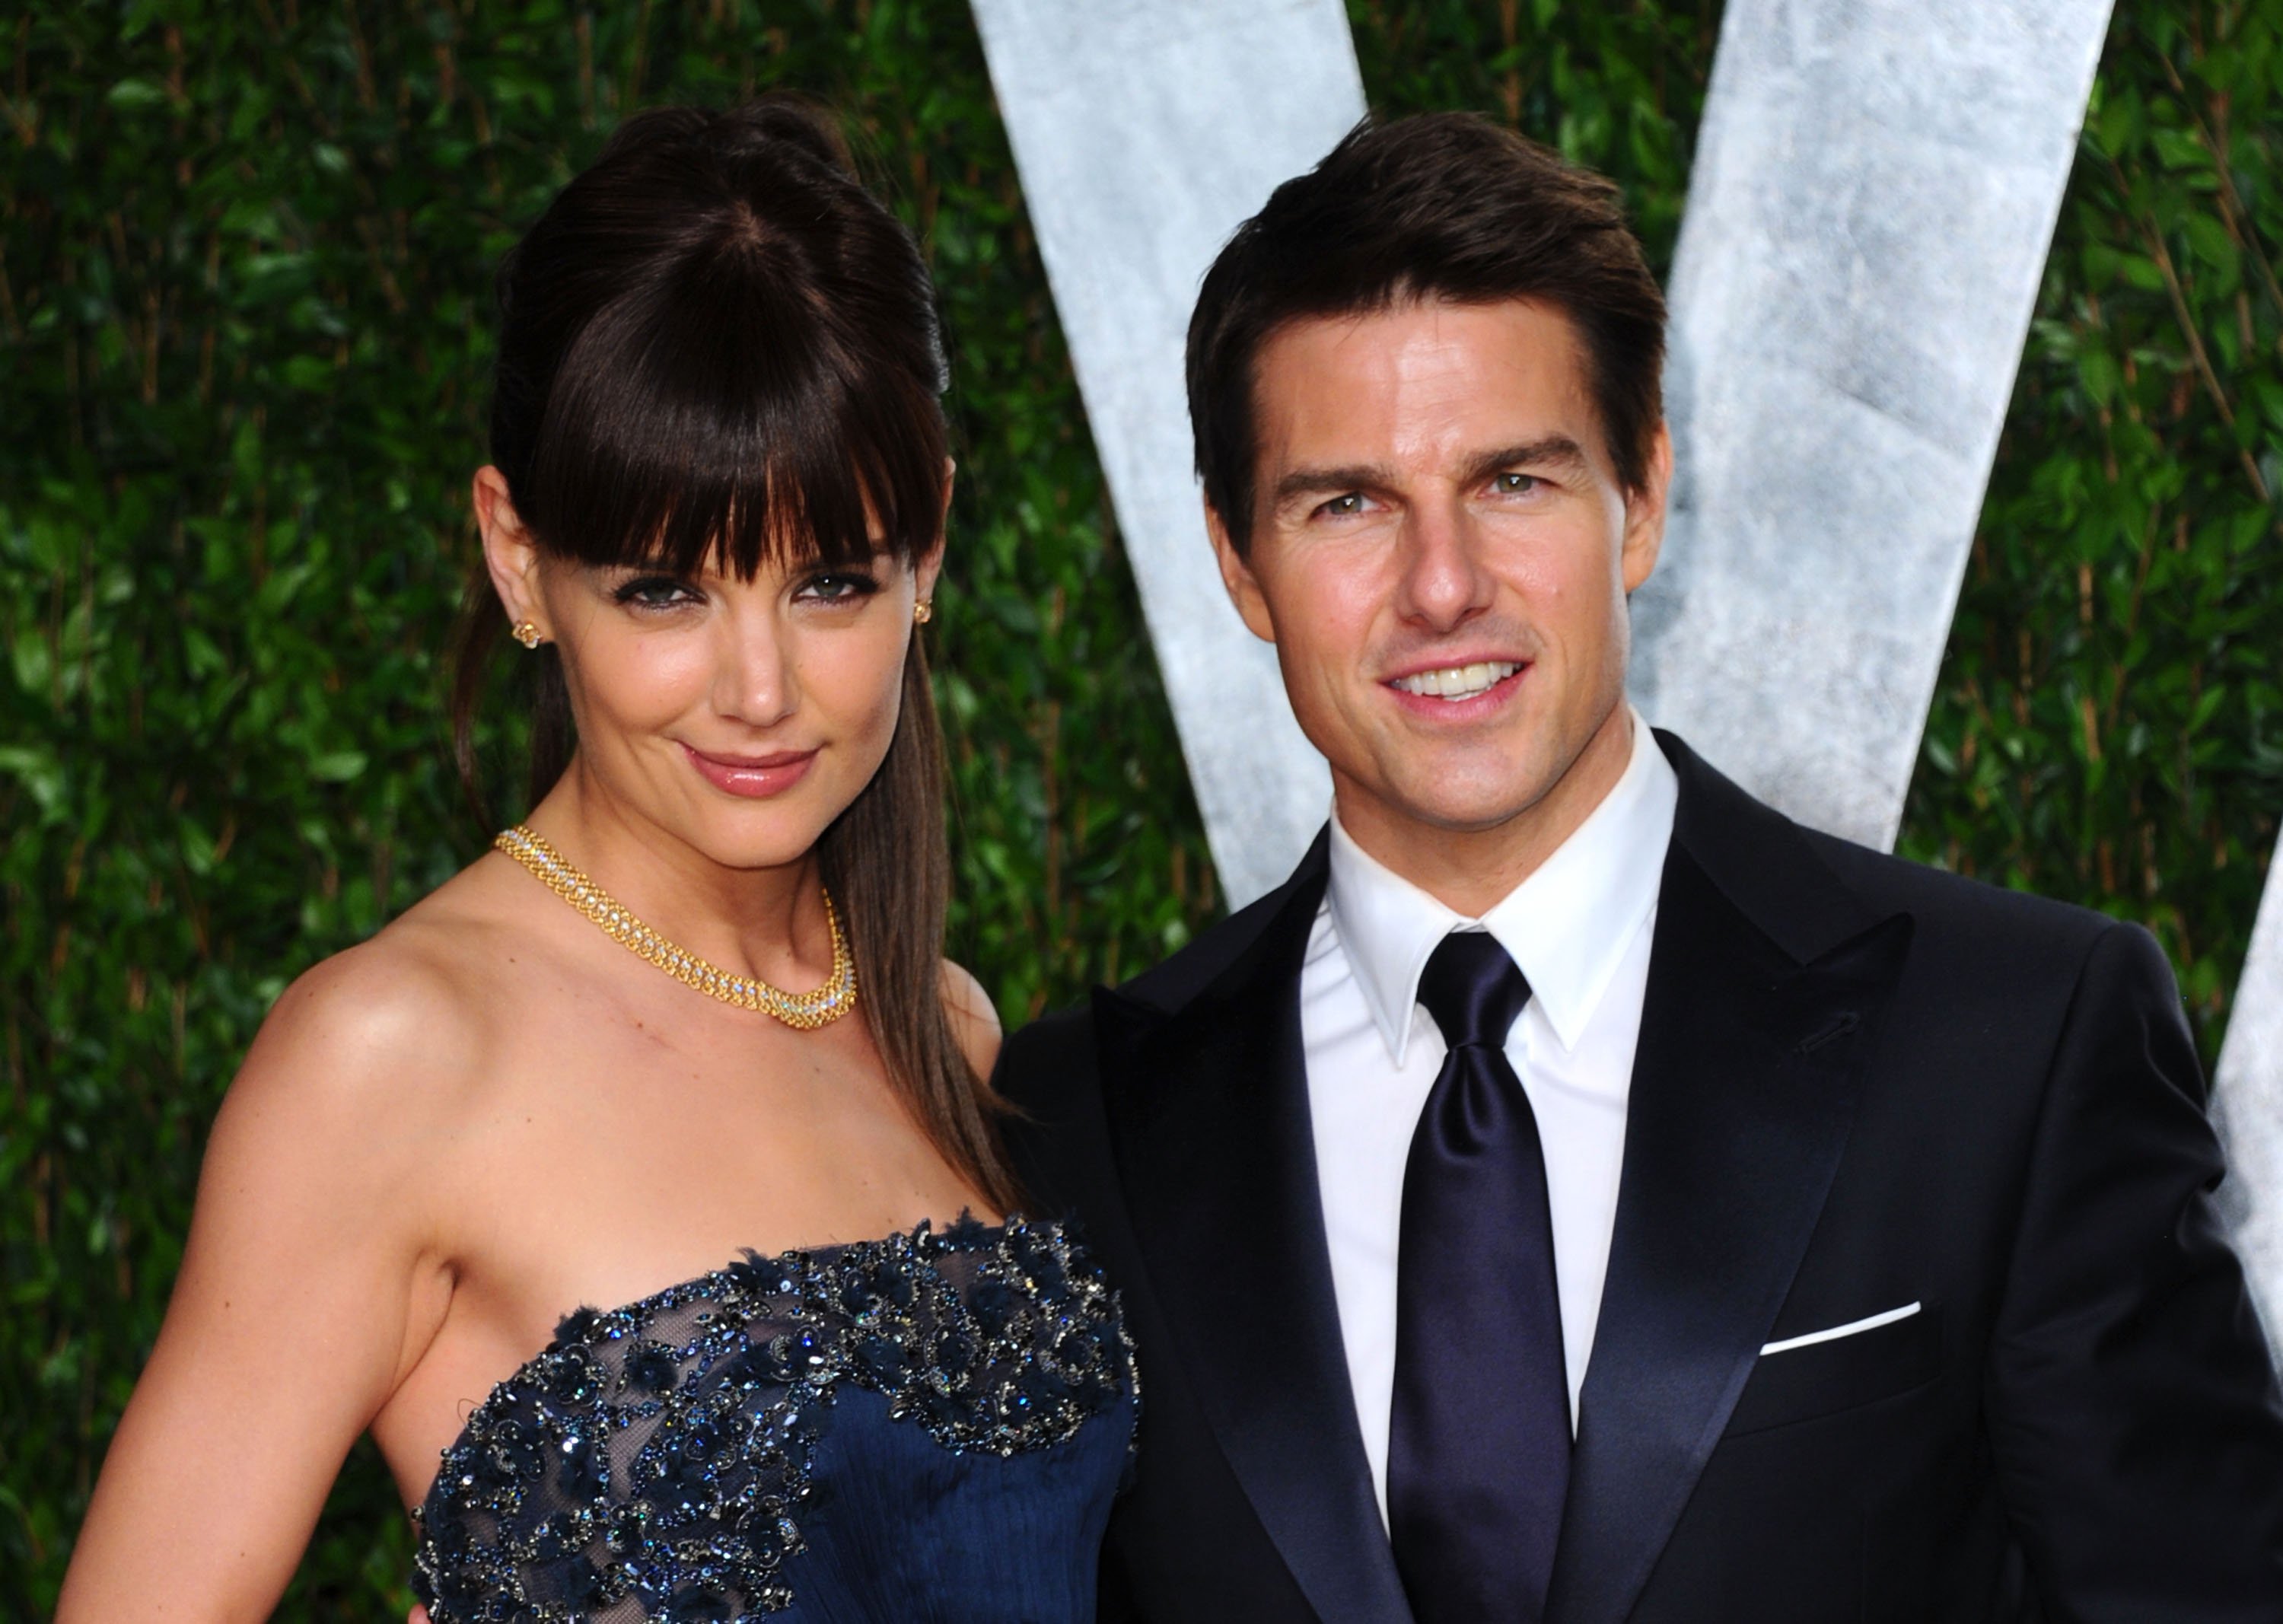 Katie Holmes and Tom Cruise arrives at the 2012 Vanity Fair Oscar Party on February 26, 2012. | Photo: GettyImages